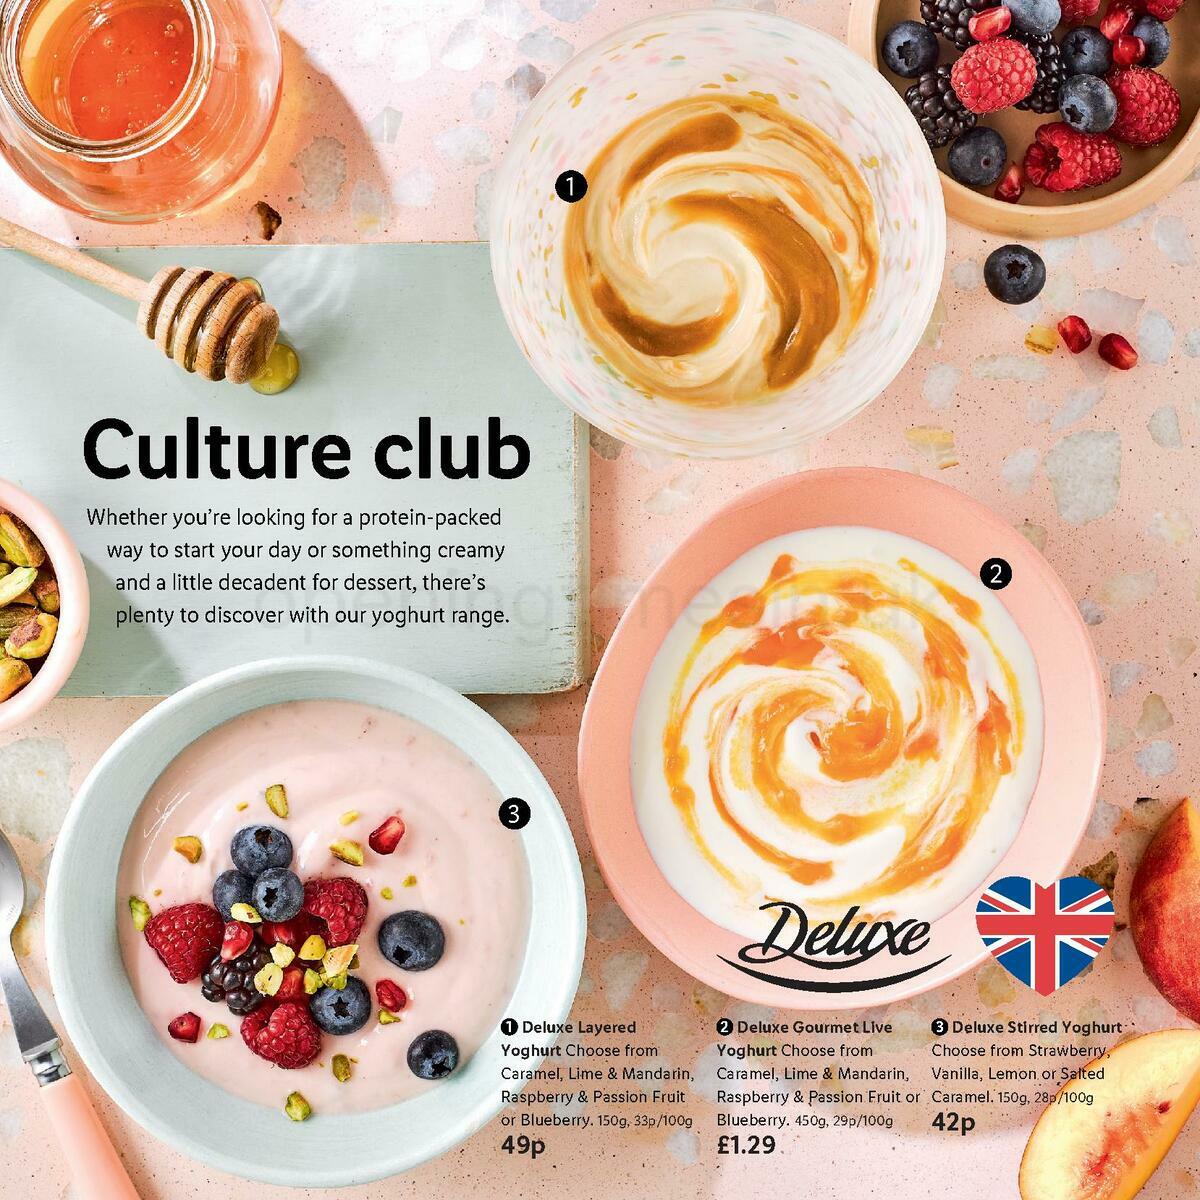 LIDL Magazine England & Wales Offers from 10 May